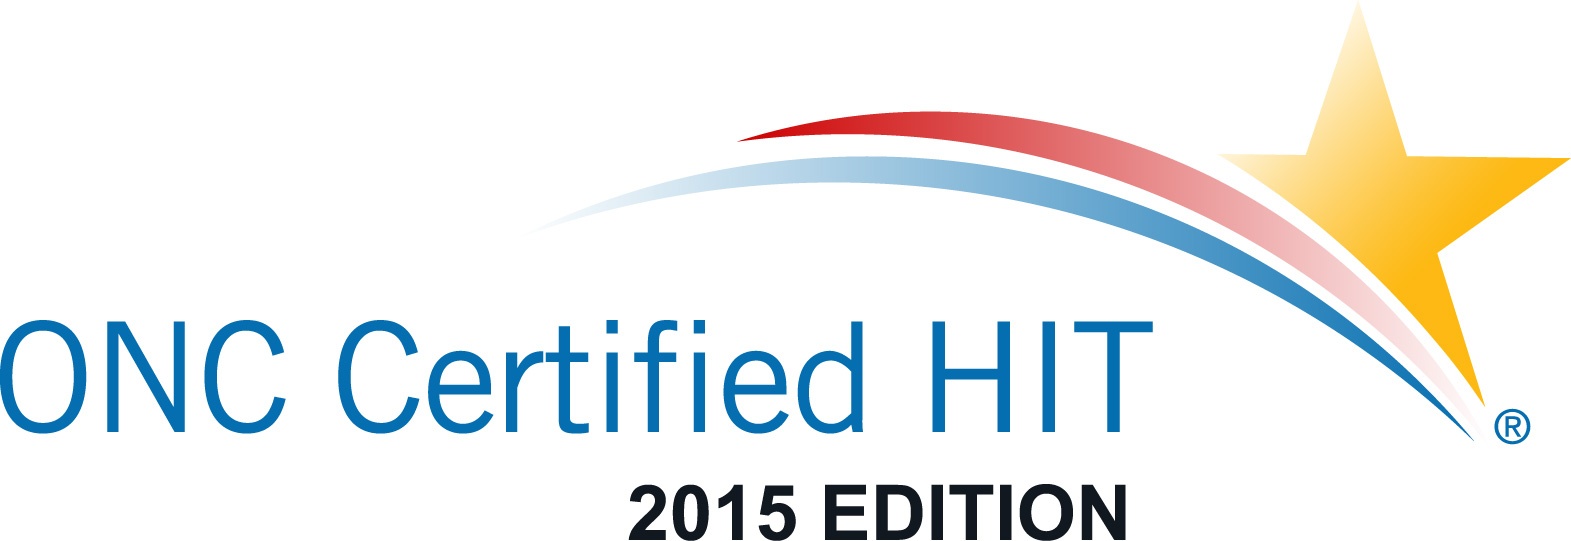 ONC_Certification_HIT_2015Edition_Stacked_RGB